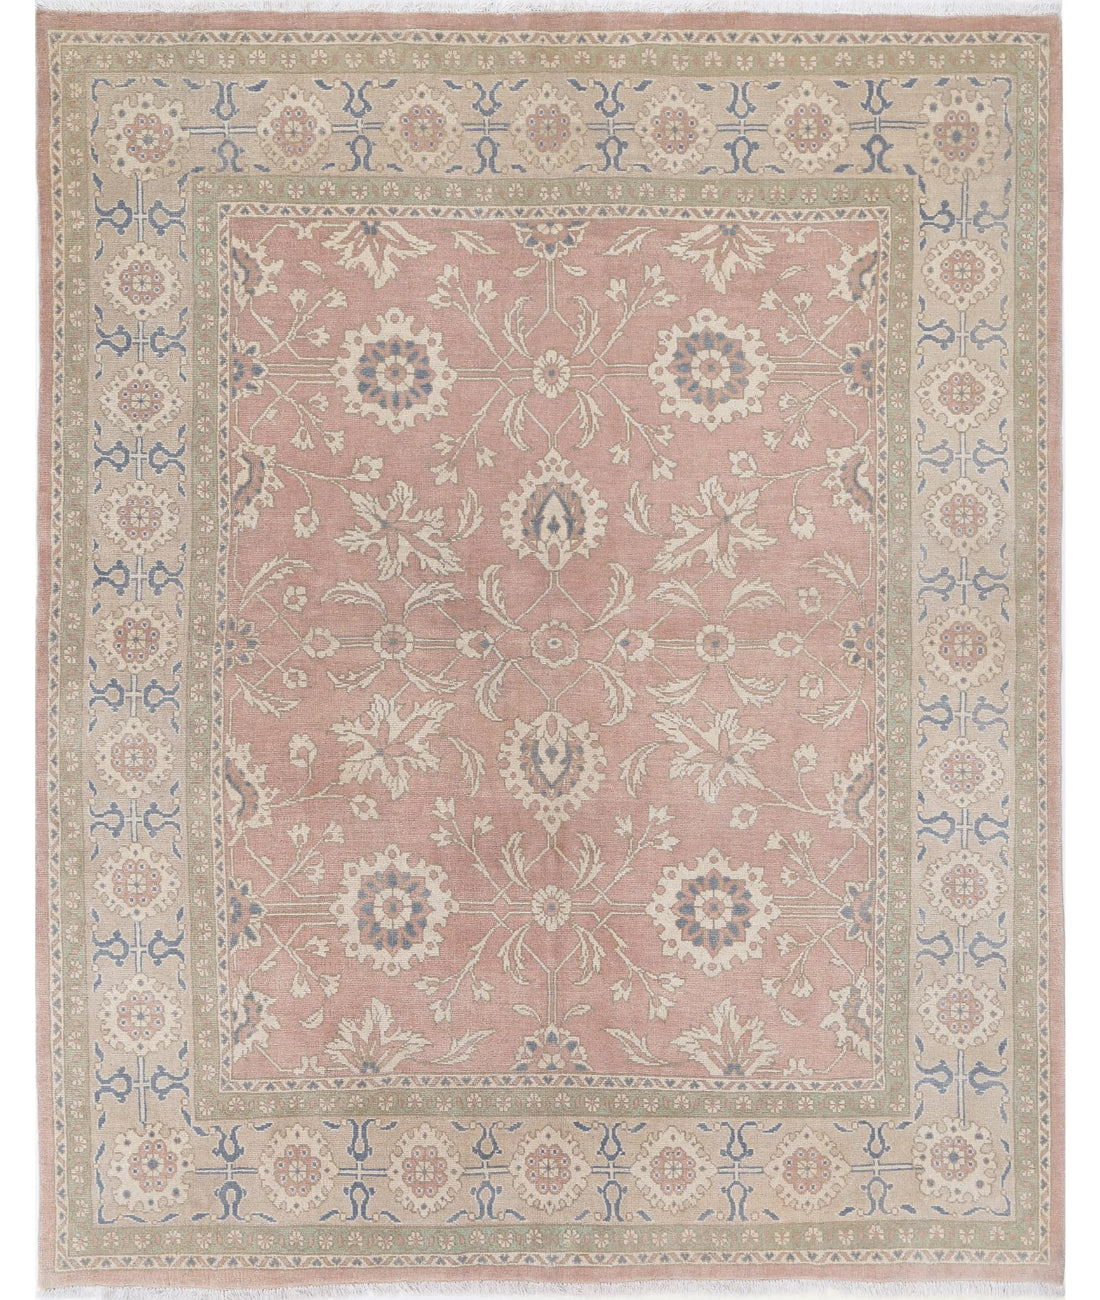 Hand Knotted Turkish Oushak Wool Rug - 6'10'' x 8'5'' 6'10'' x 8'5'' (205 X 253) / Peach / Taupe